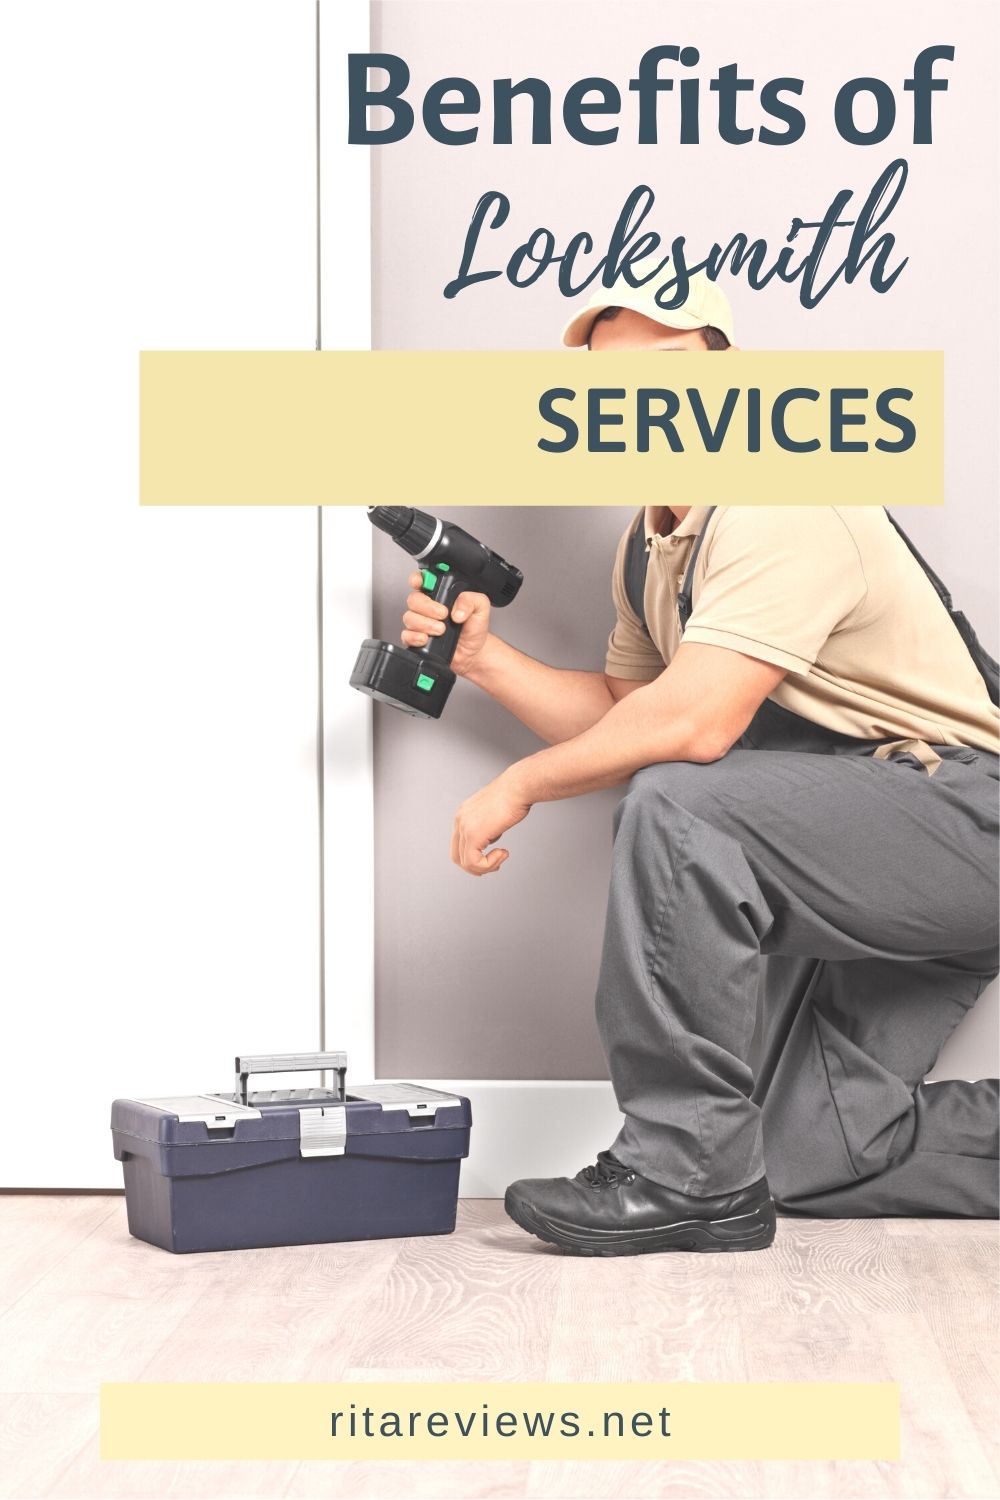 Benefits of Locksmith Services in Chicago, IL